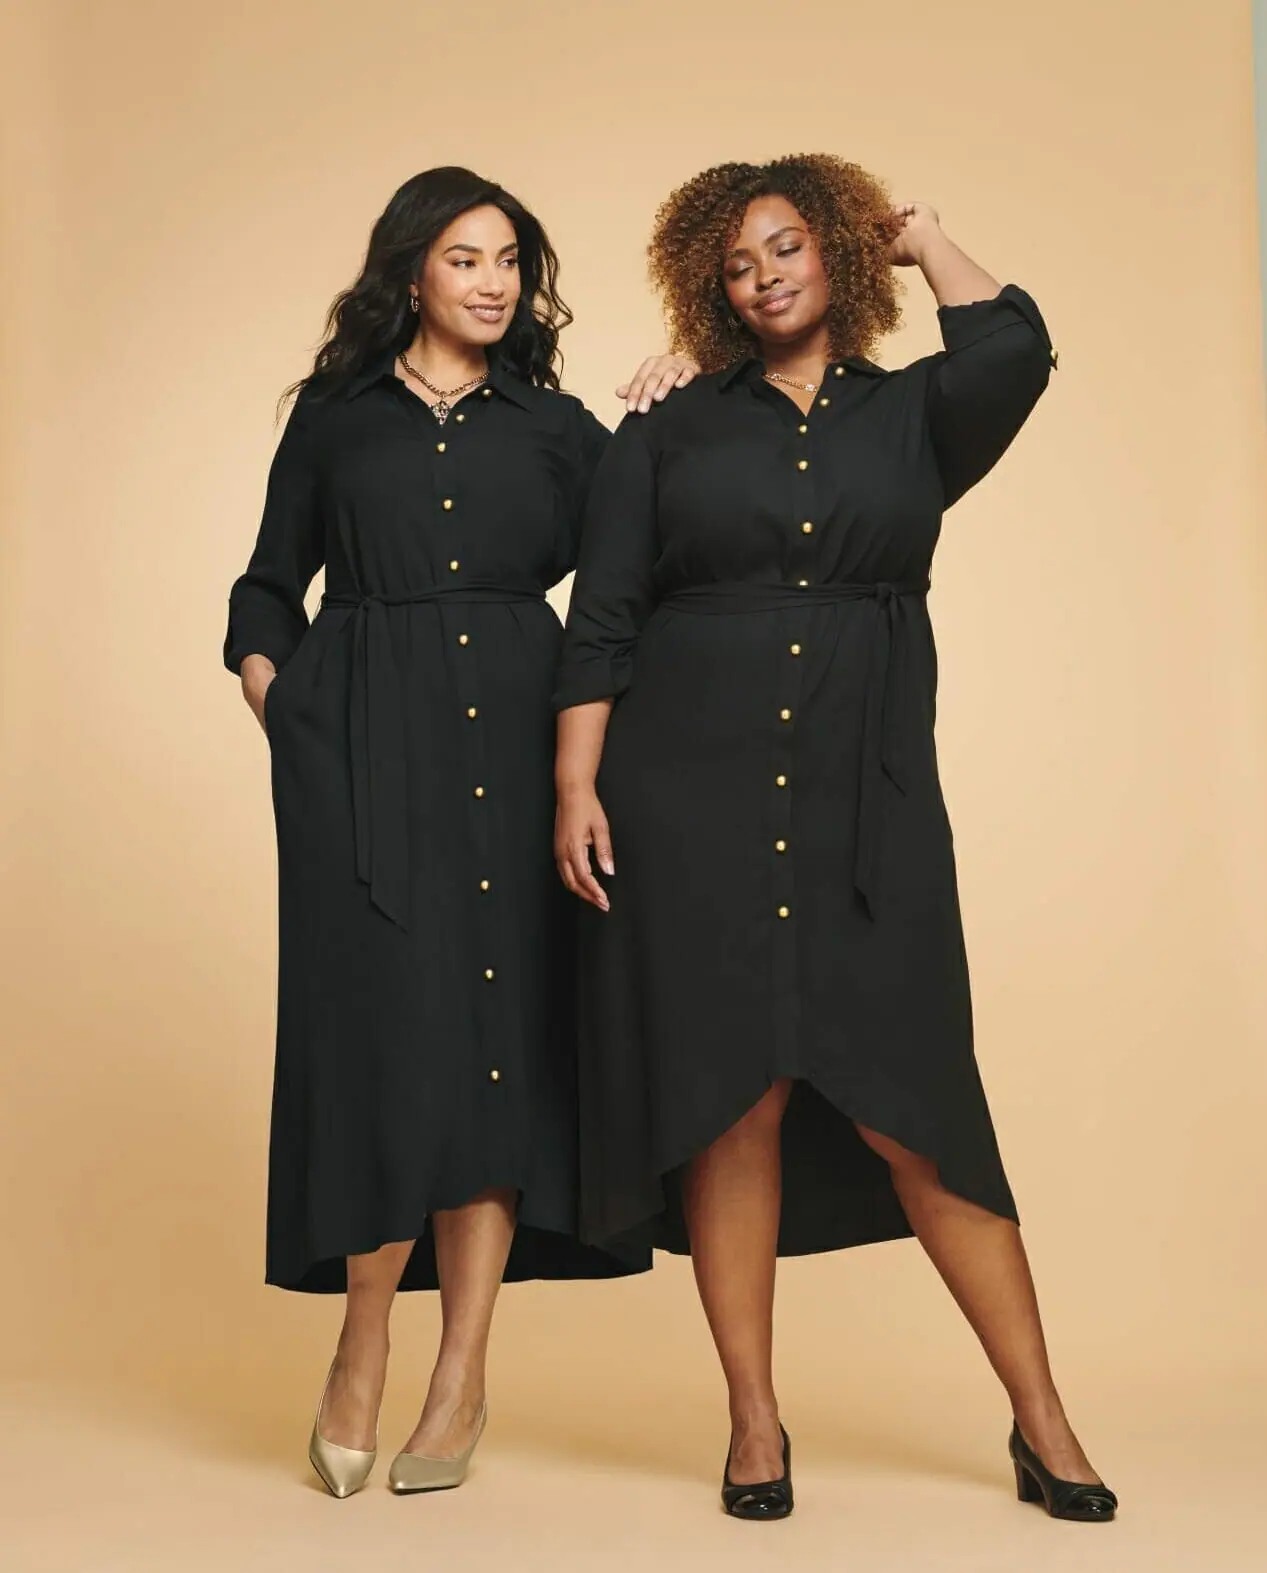 Flattering style tips for plus-size women